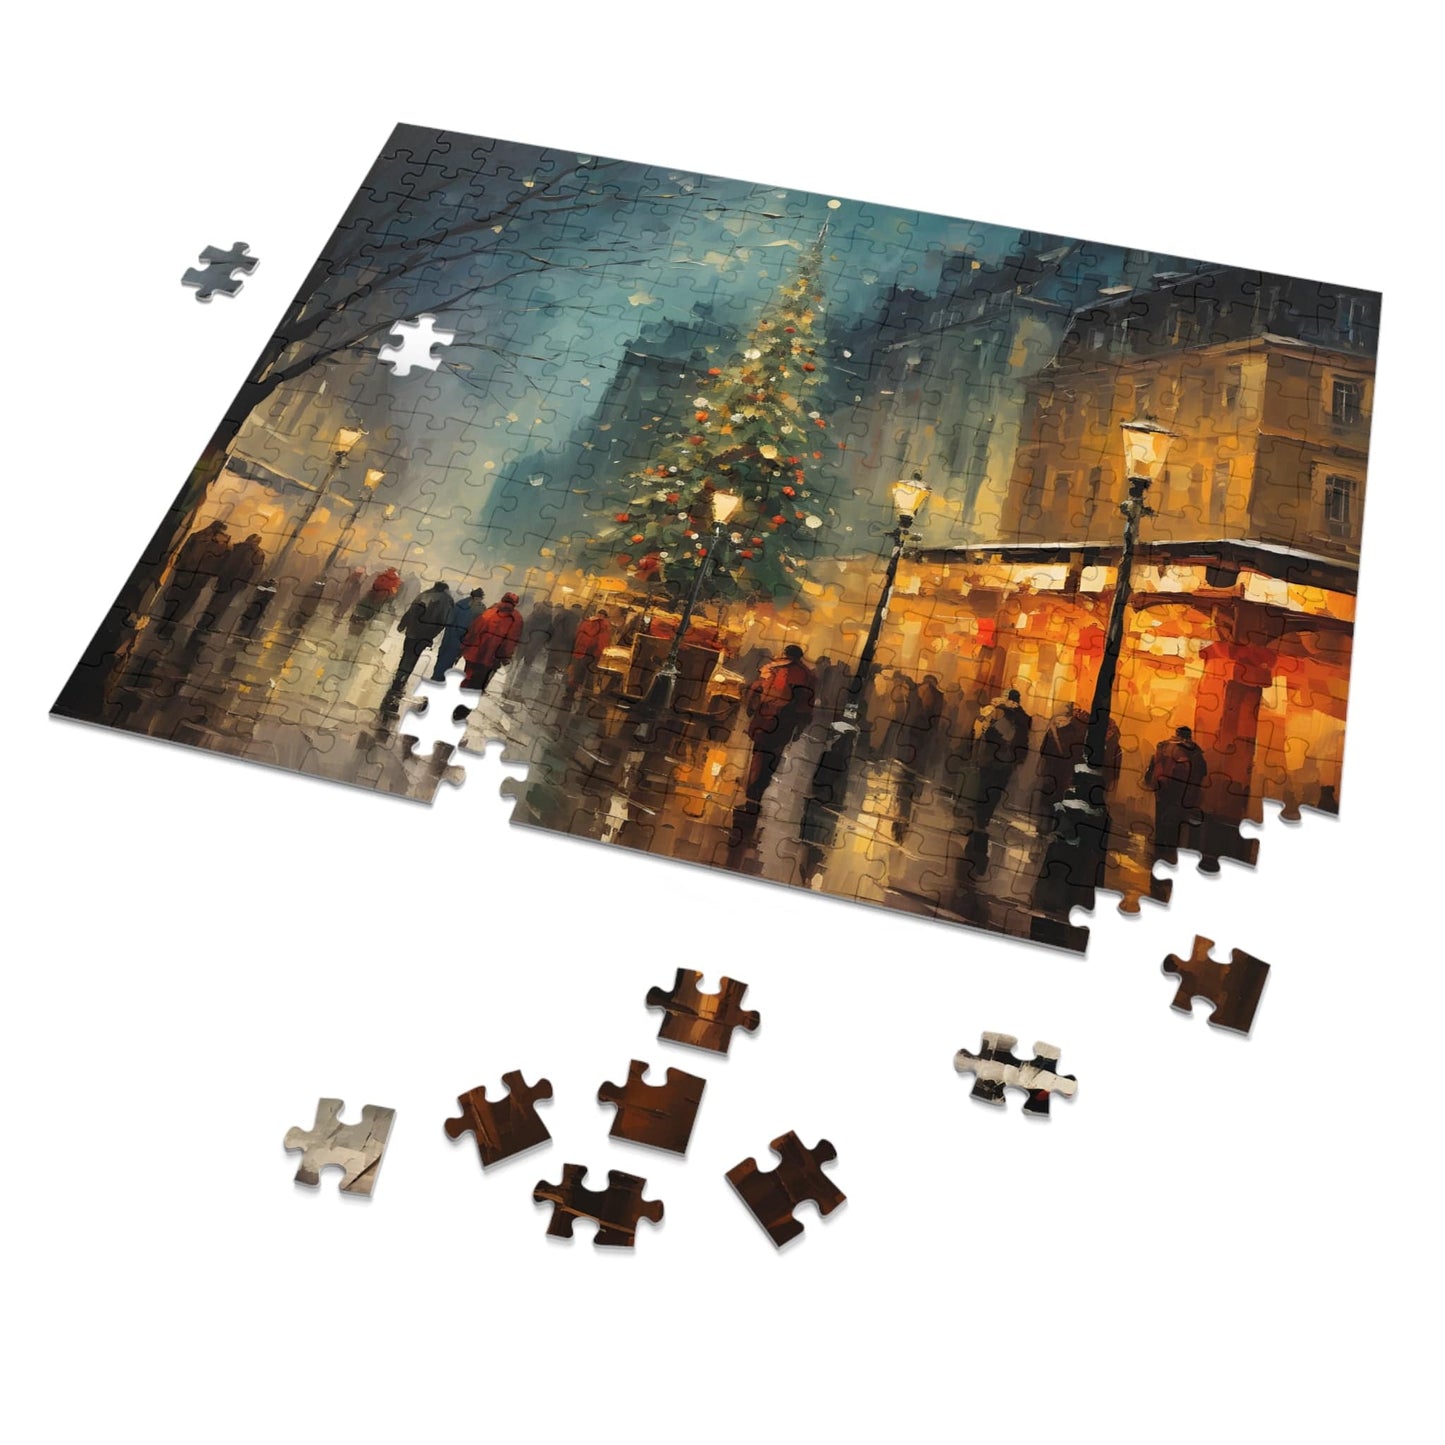 Christmas Jigsaw Puzzle: Vibrant Festive Market | Van Gogh Inspired | Customizable Sizes (30-1000 Pieces) | Ideal Gift for Family Game Night | Stress Relief for Kids & Adults